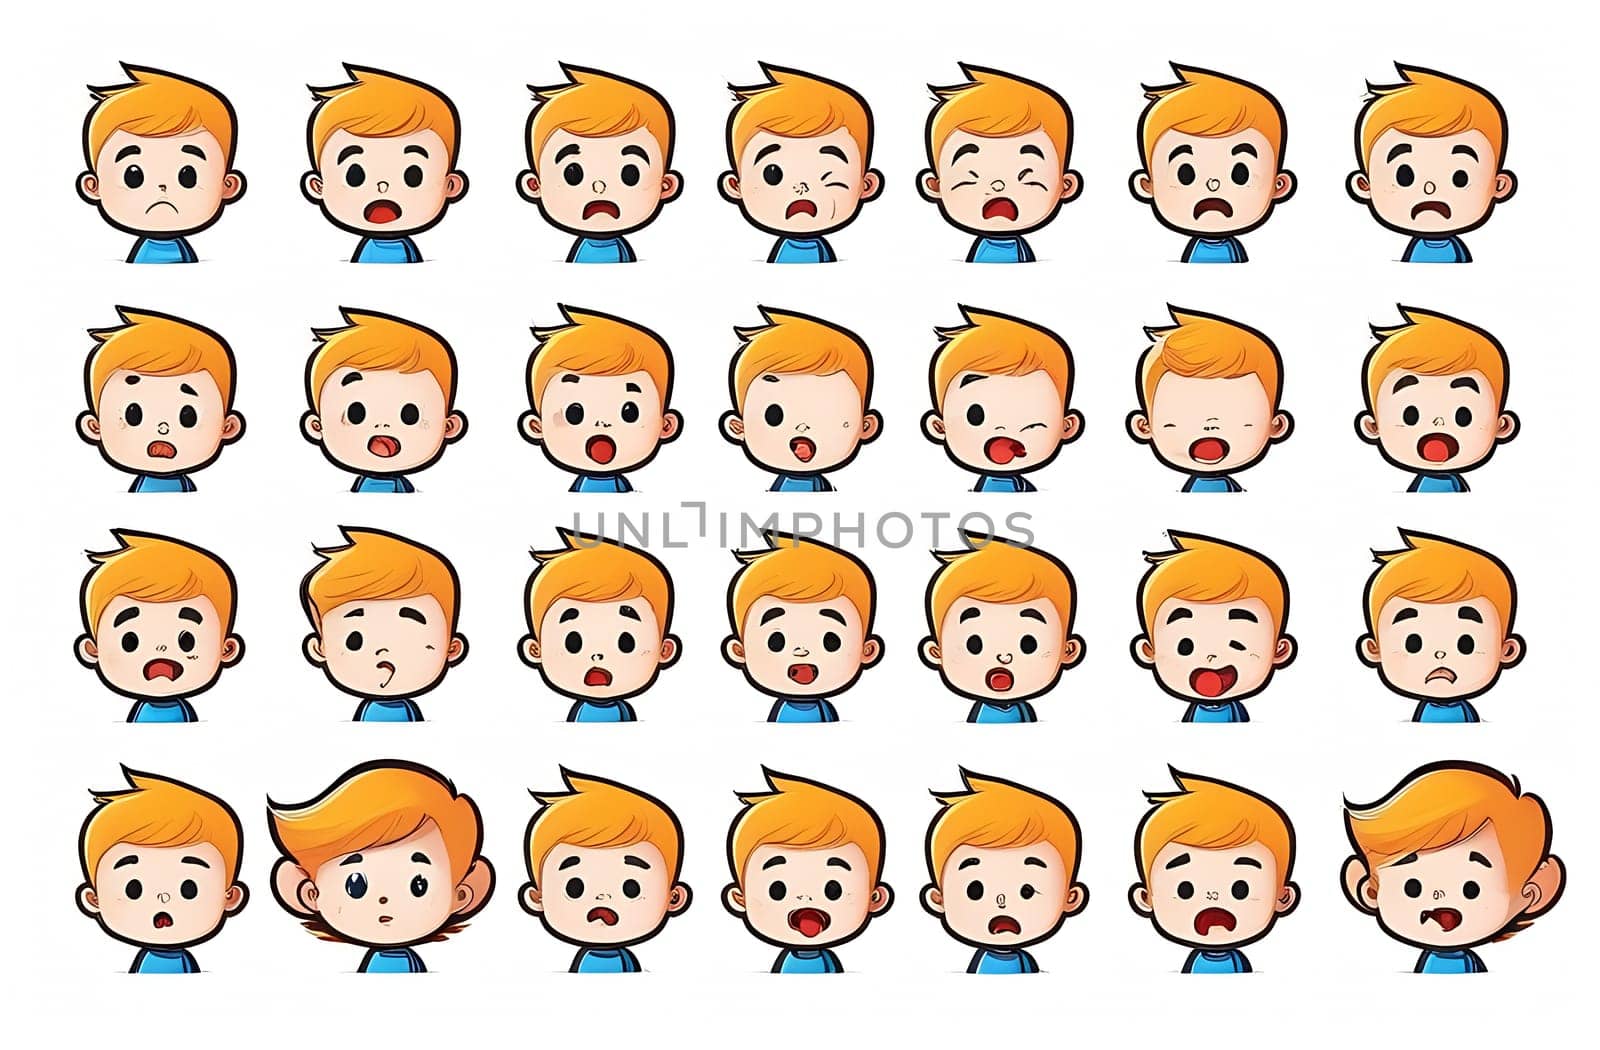 A set of illustrations of icons of different emotions on the face of a small baby, highlighted on a white background.